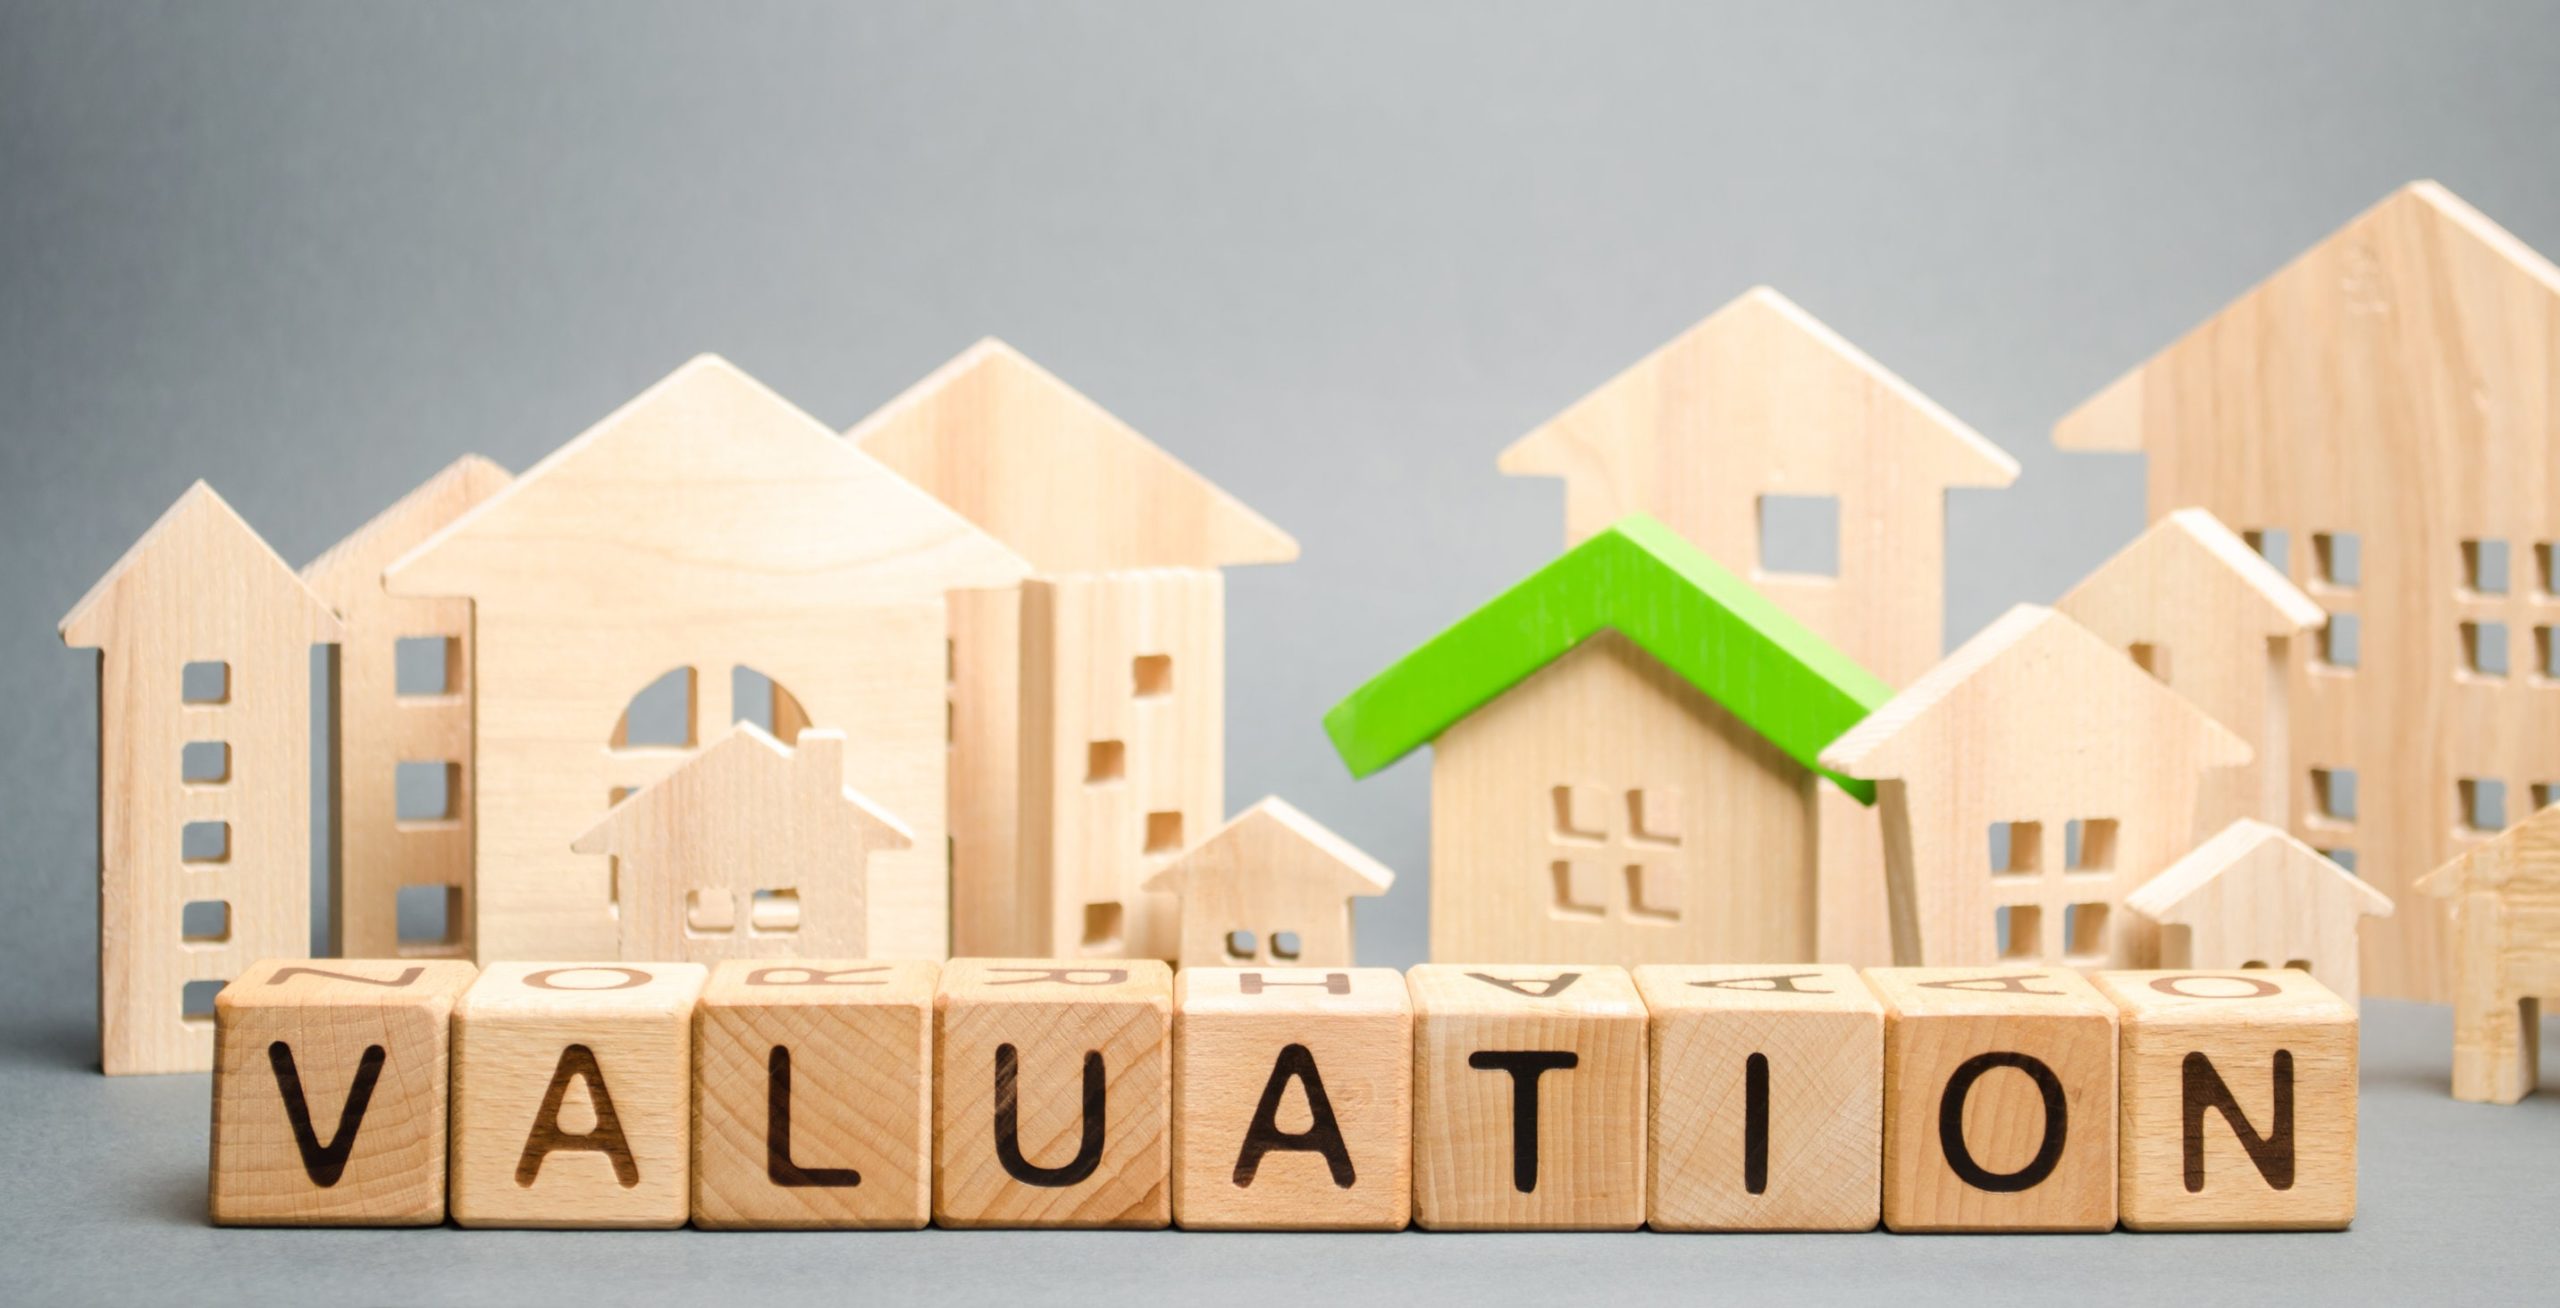 Home Valuation canada Real estate market